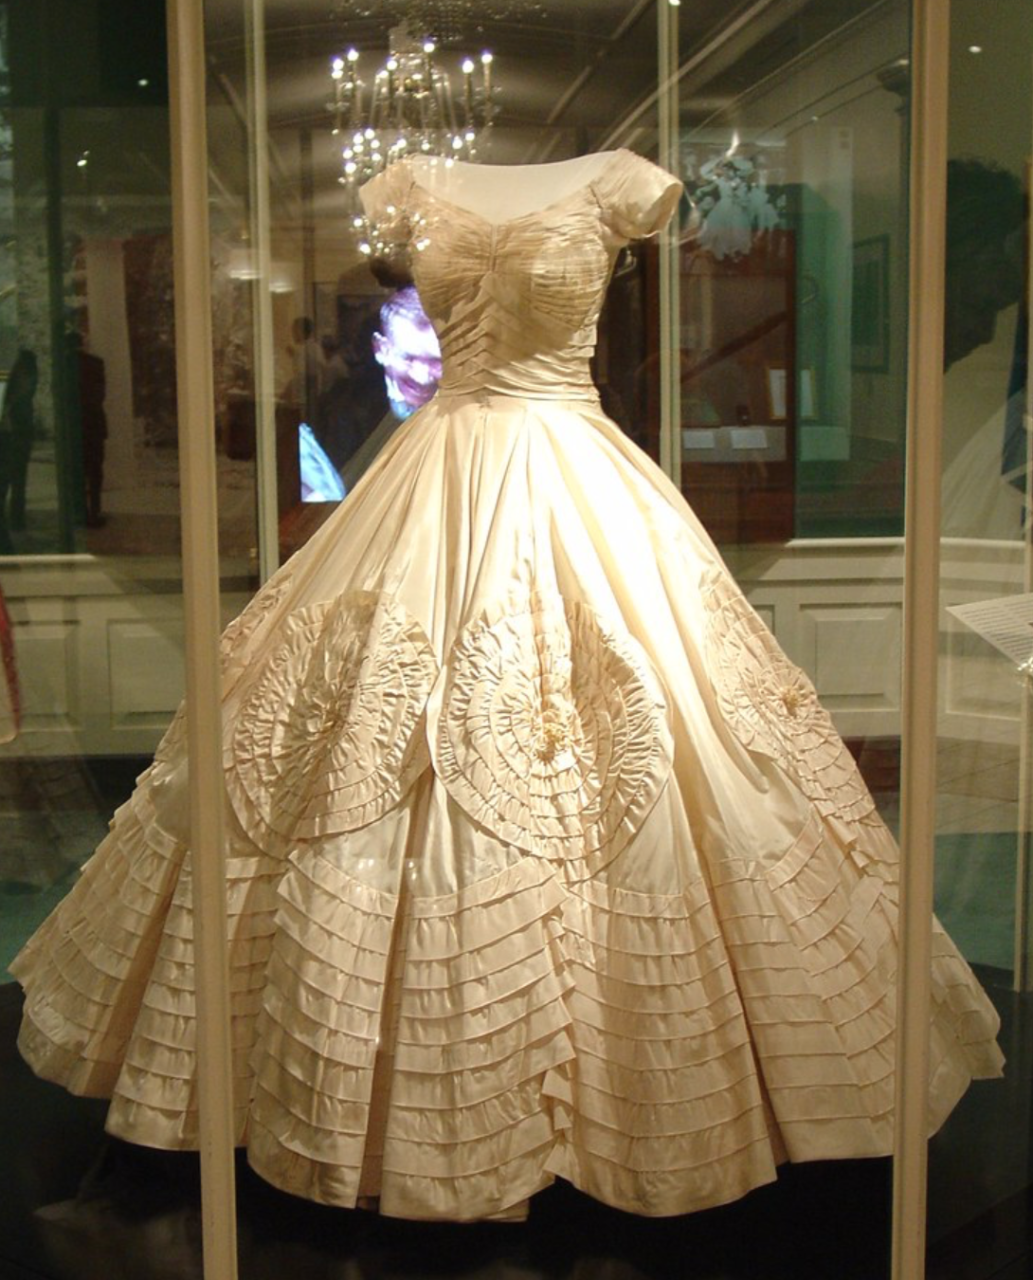 Jacqueline Kennedy's wedding dress on display in 2003